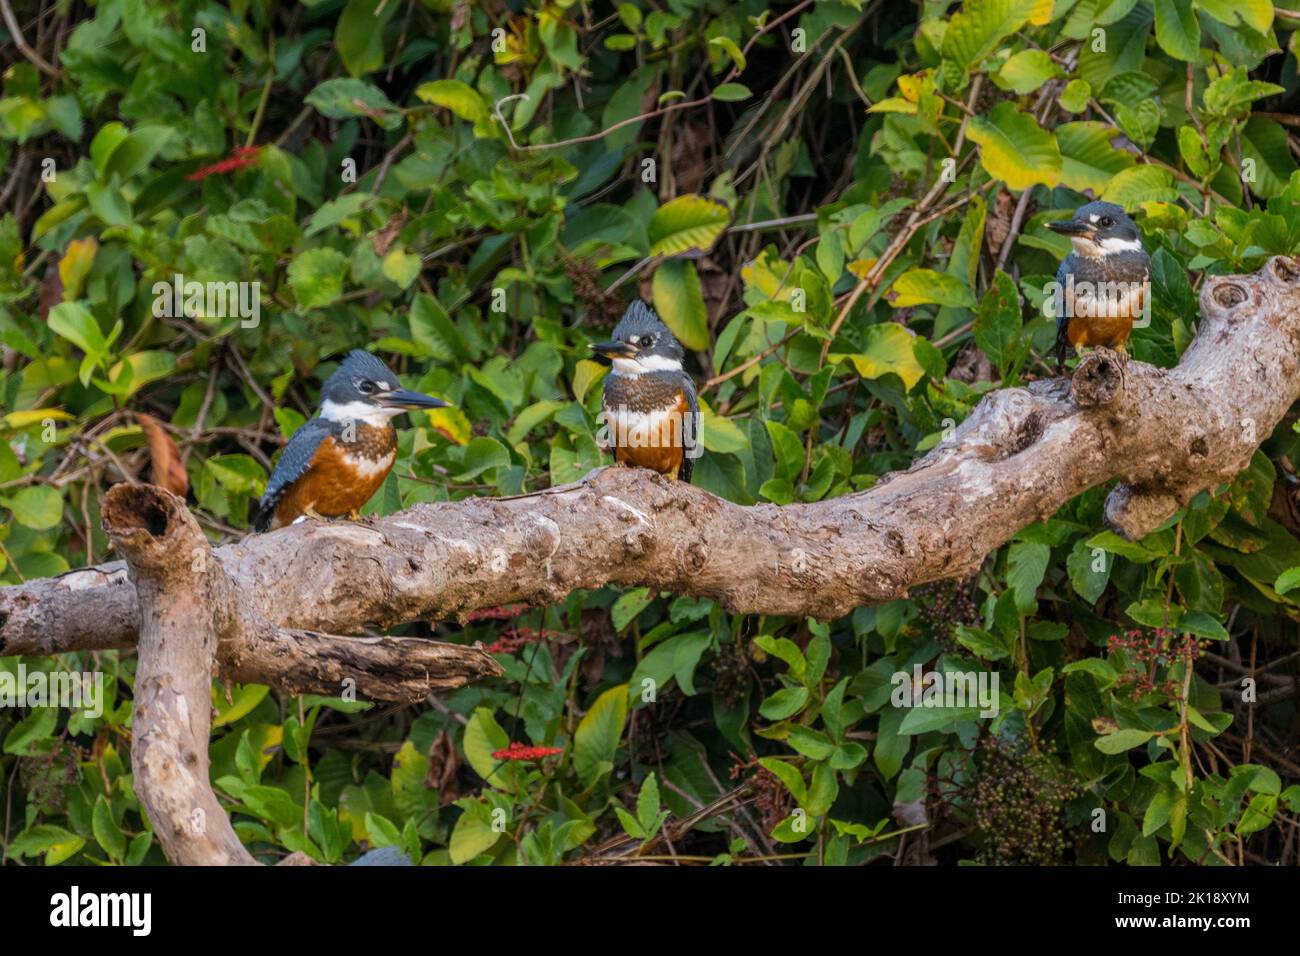 A group of Ringed kingfishers (Ceryle torquata) perched on a branch at a tributary of the Cuiaba River near Porto Jofre in the northern Pantanal, Mato Stock Photo